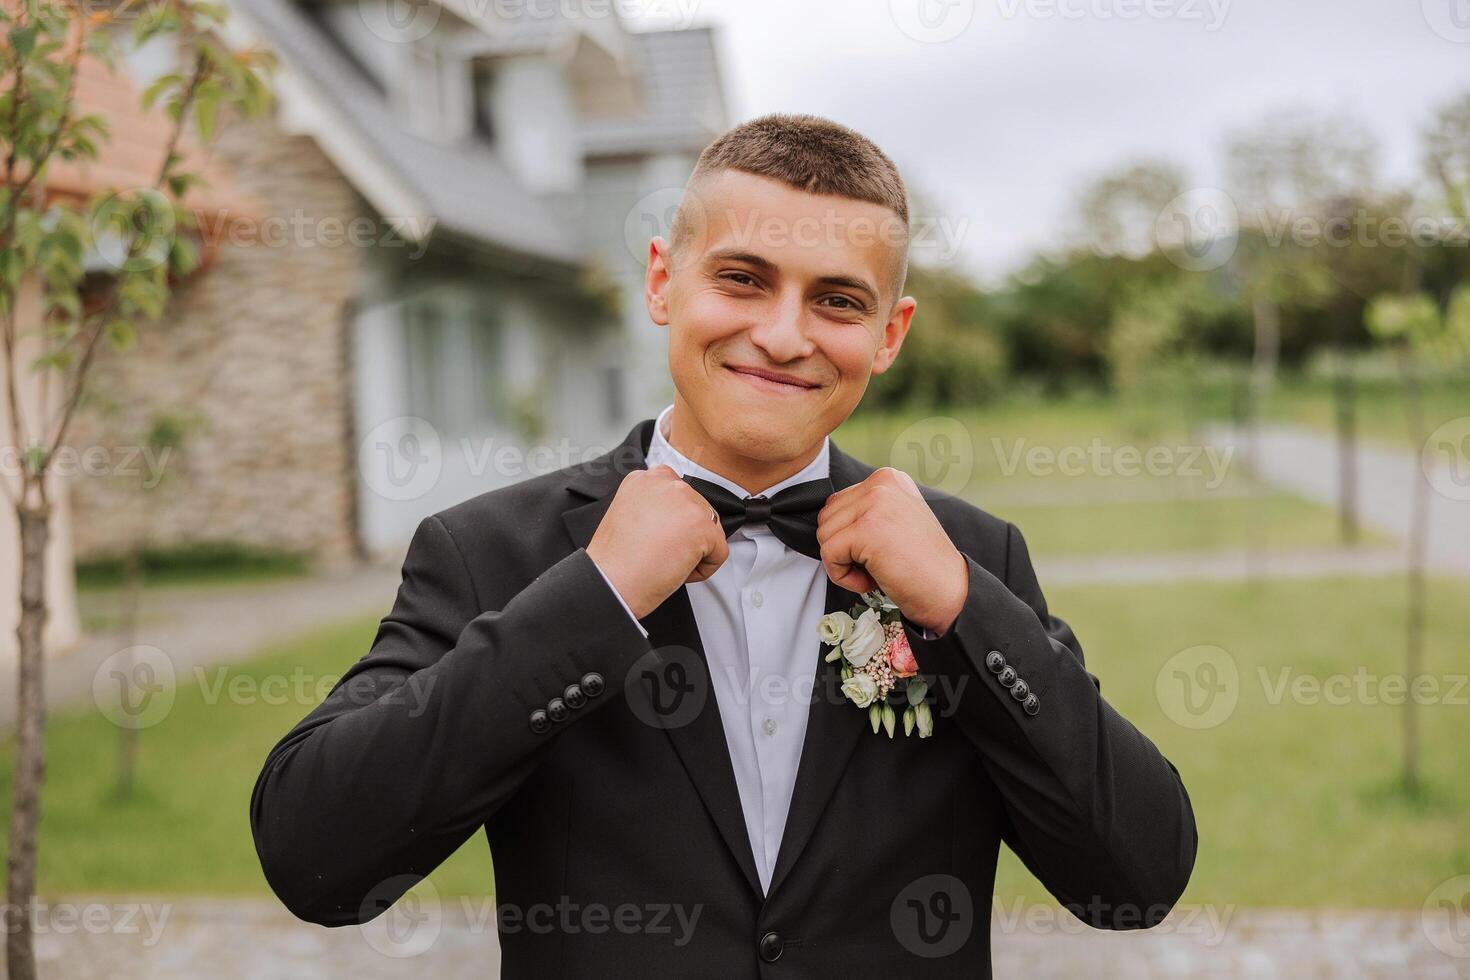 The groom in a black suit adjusts his bow tie, poses against the background of a green tree. Wedding portrait. photo